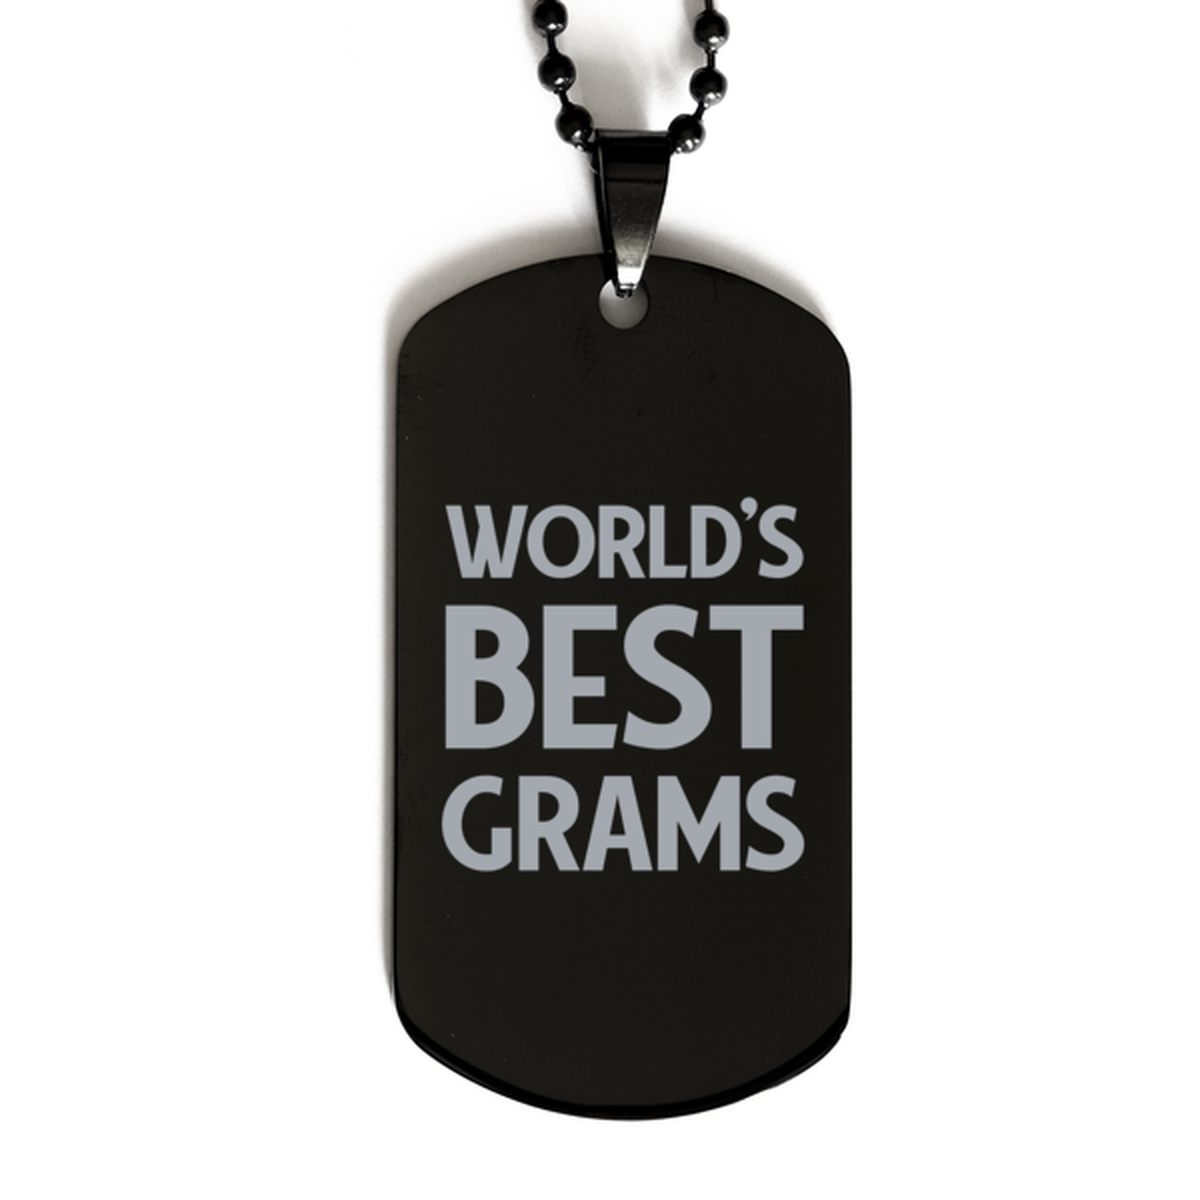 Worlds Best Grams Gifts, Funny Black Engraved Dog Tag For Grams, Birthday Presents For Women